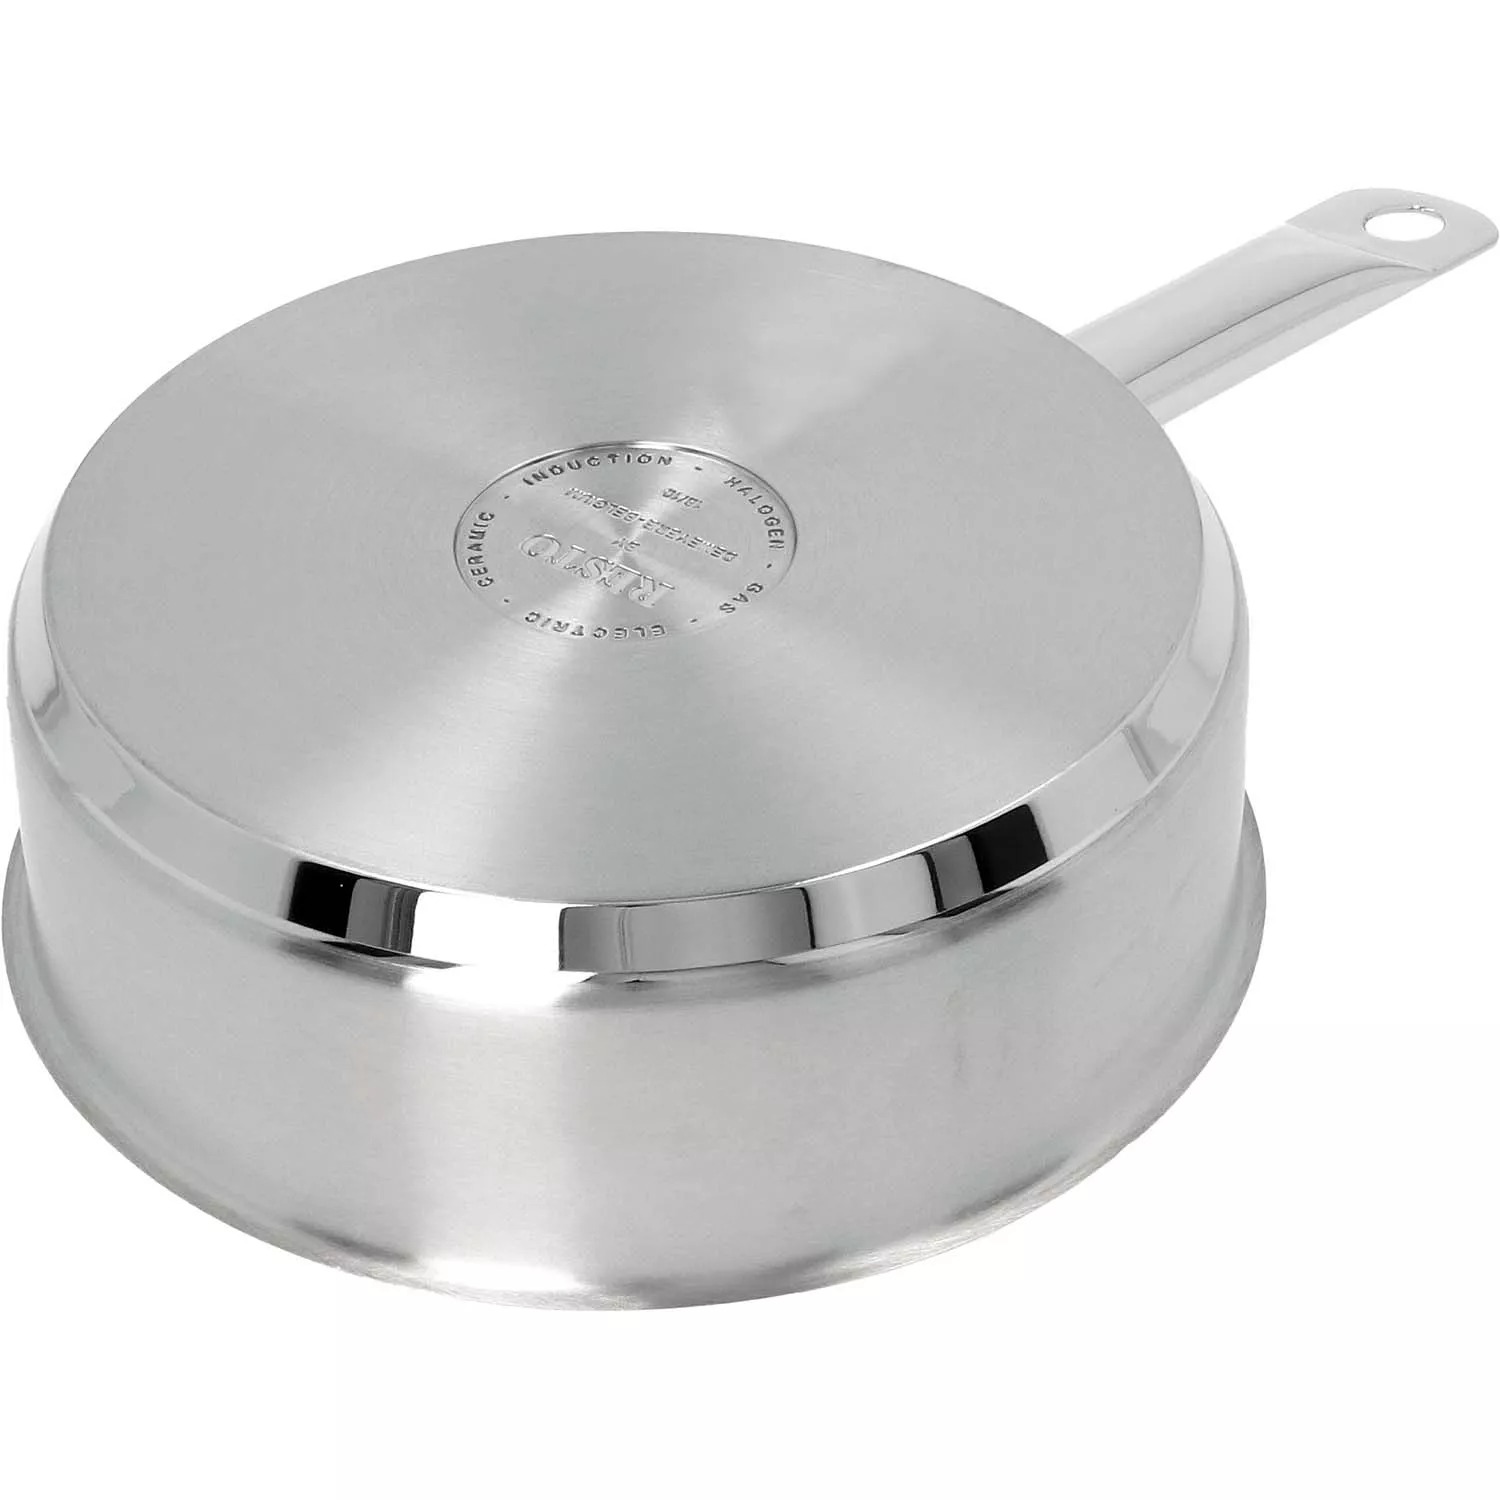 Induction 18/10 Stainless Steel Clad Bottom 6 Egg Poacher Pan 9